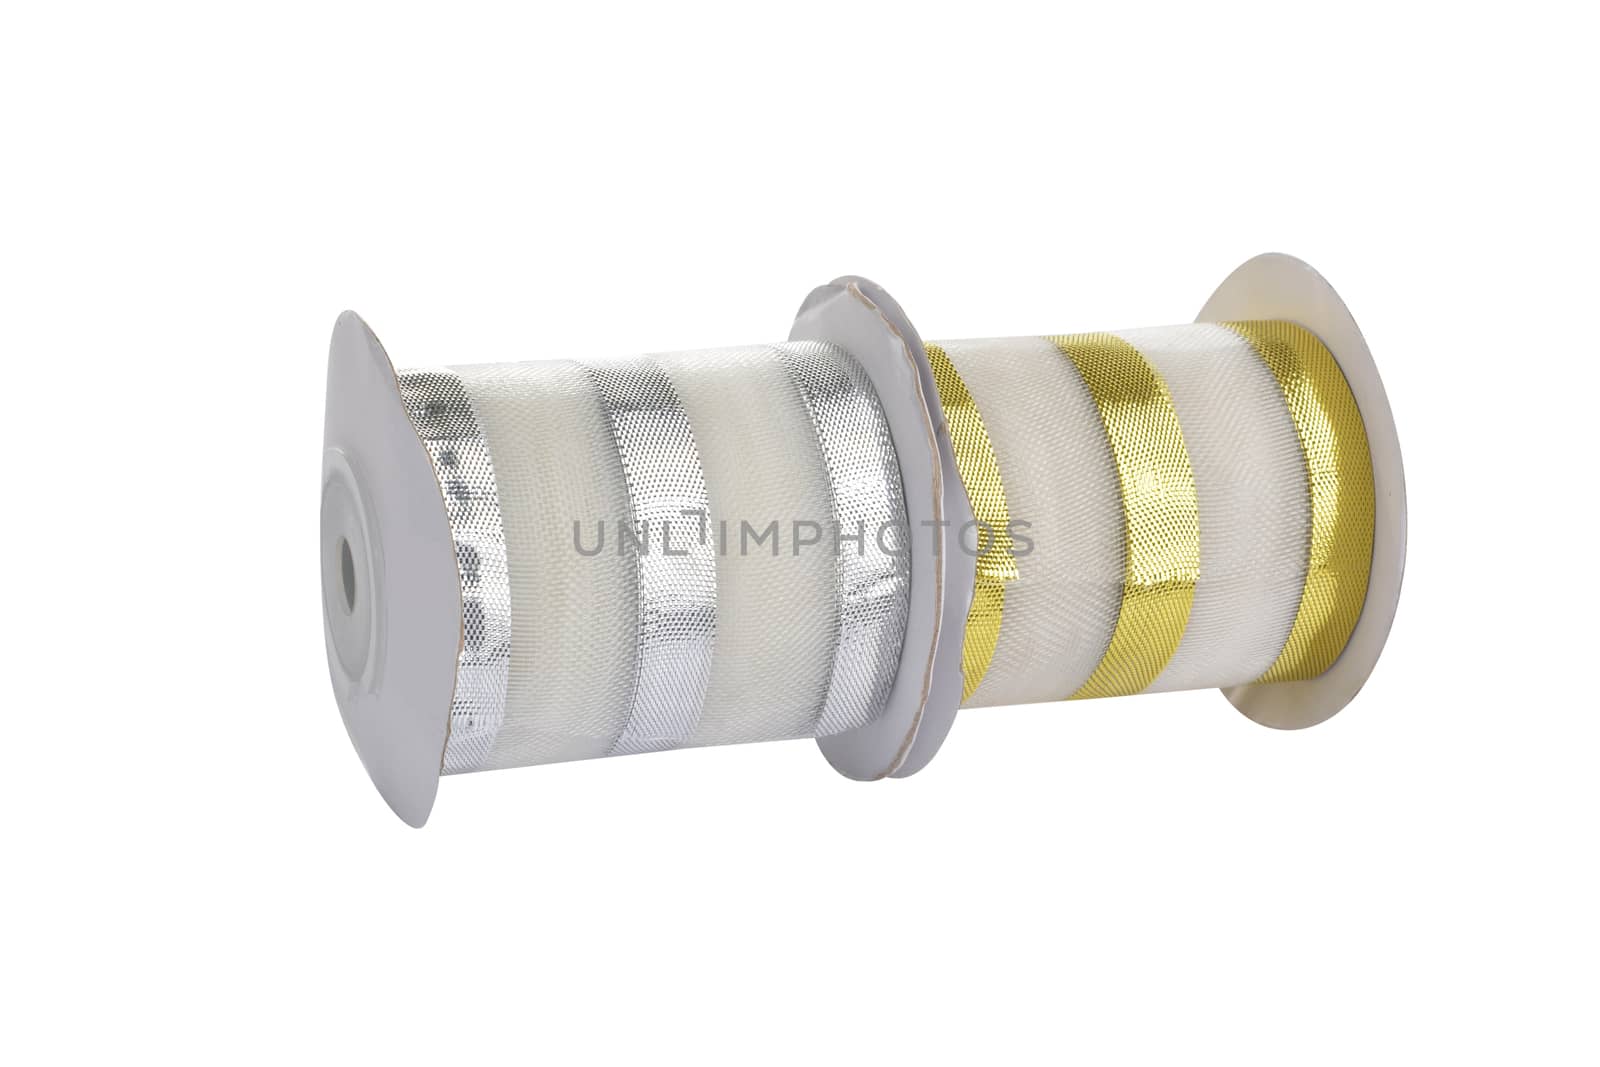 damaged packaging of set Reel with shiny organza tape ribbon festive Gold and silver isolated on white background. Use for sewing and gift wrapping.